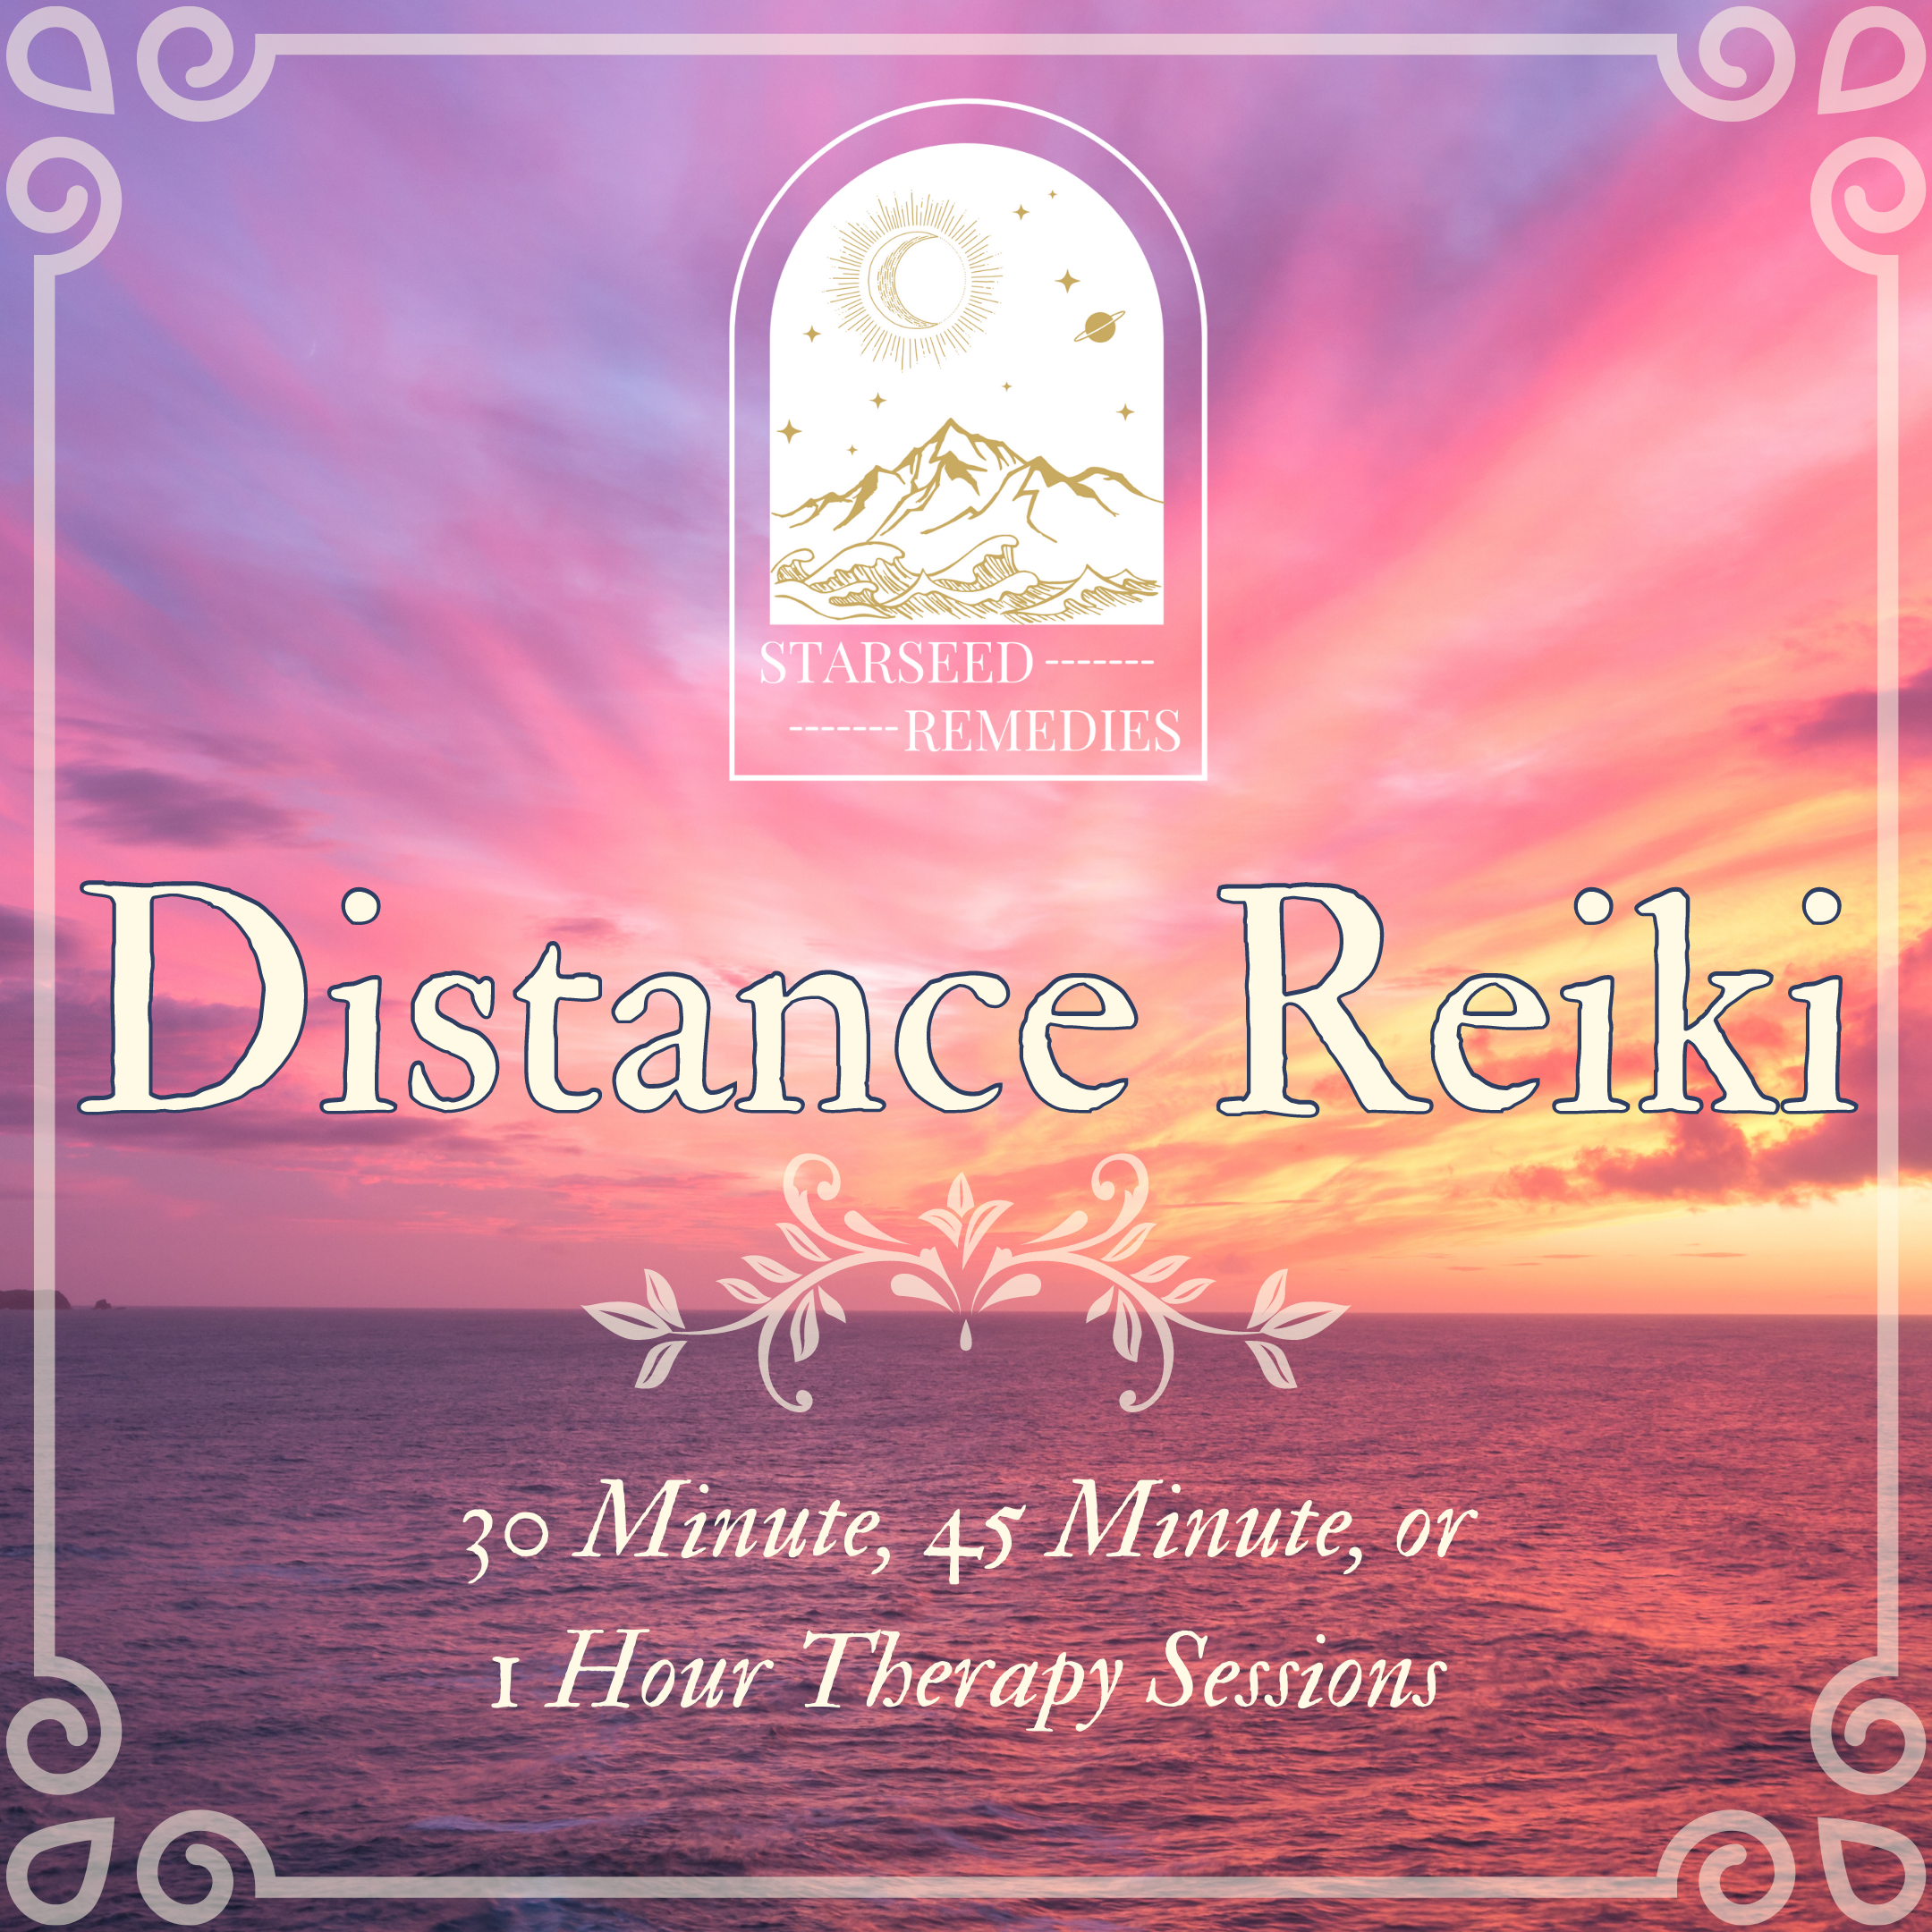 Distance Reiki Healing - 30 Minute, 45 Minute, & 1 Hour Sessions - Starseed Remedies